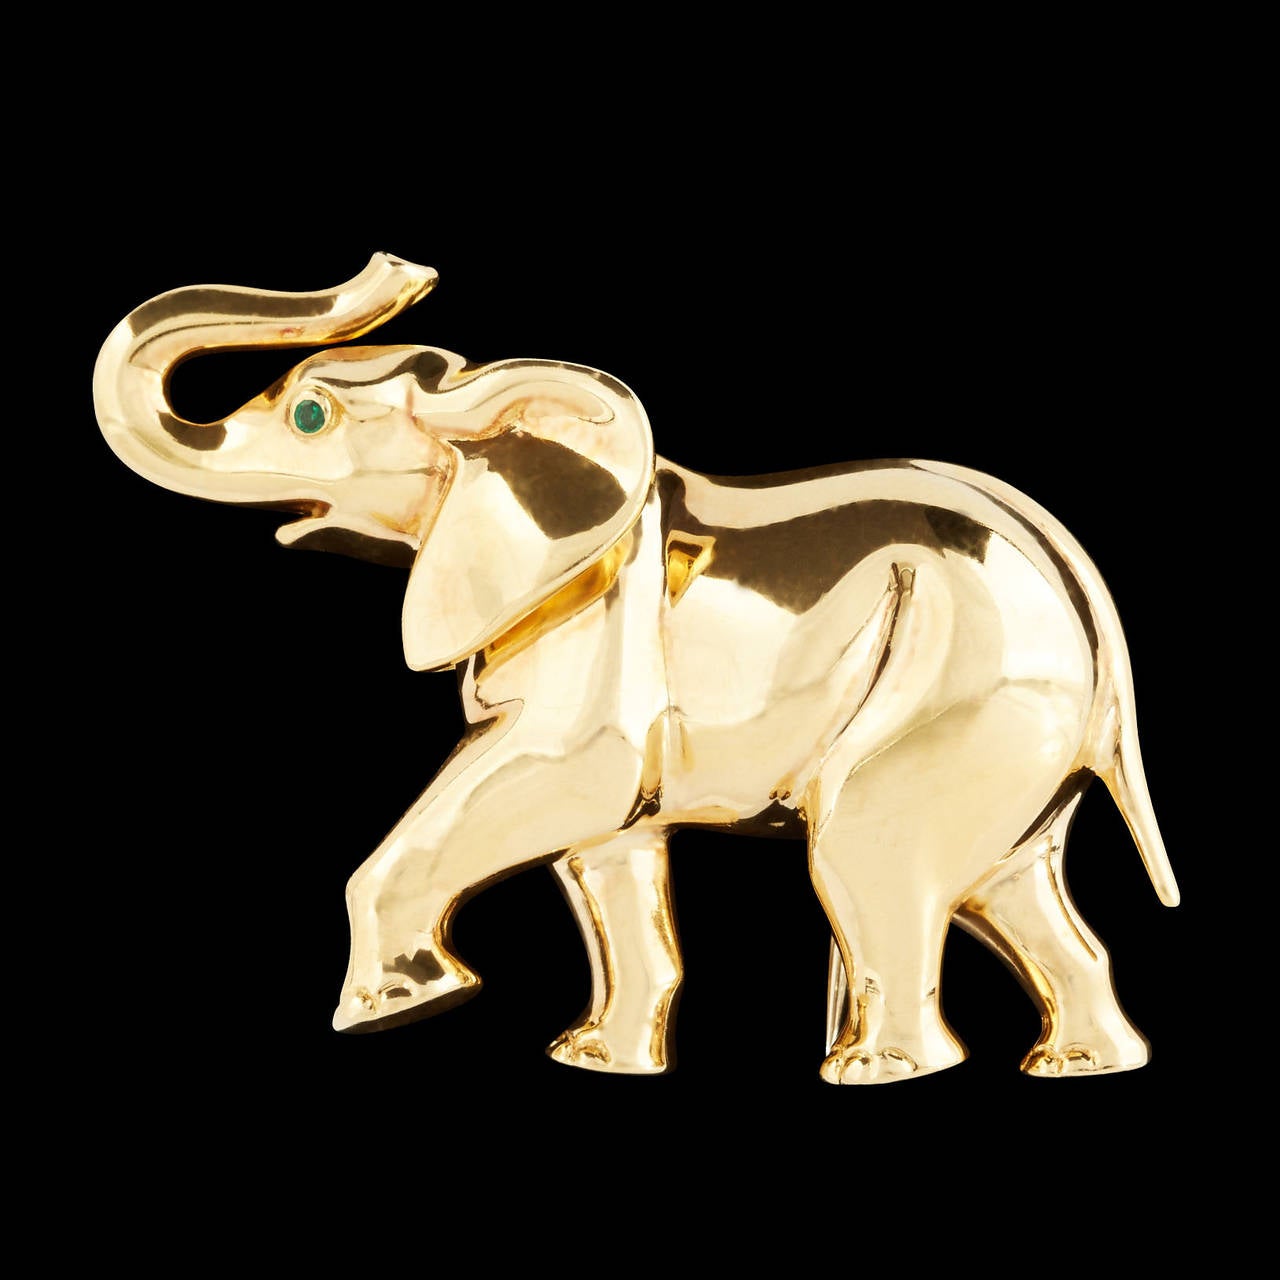 Cartier Beautifully Crafted 18Kt Yellow Gold Elephant Brooch with Emerald Eyes. The piece measures approximately 2 inches by 1.5 inches and weighs 24.1 grams.